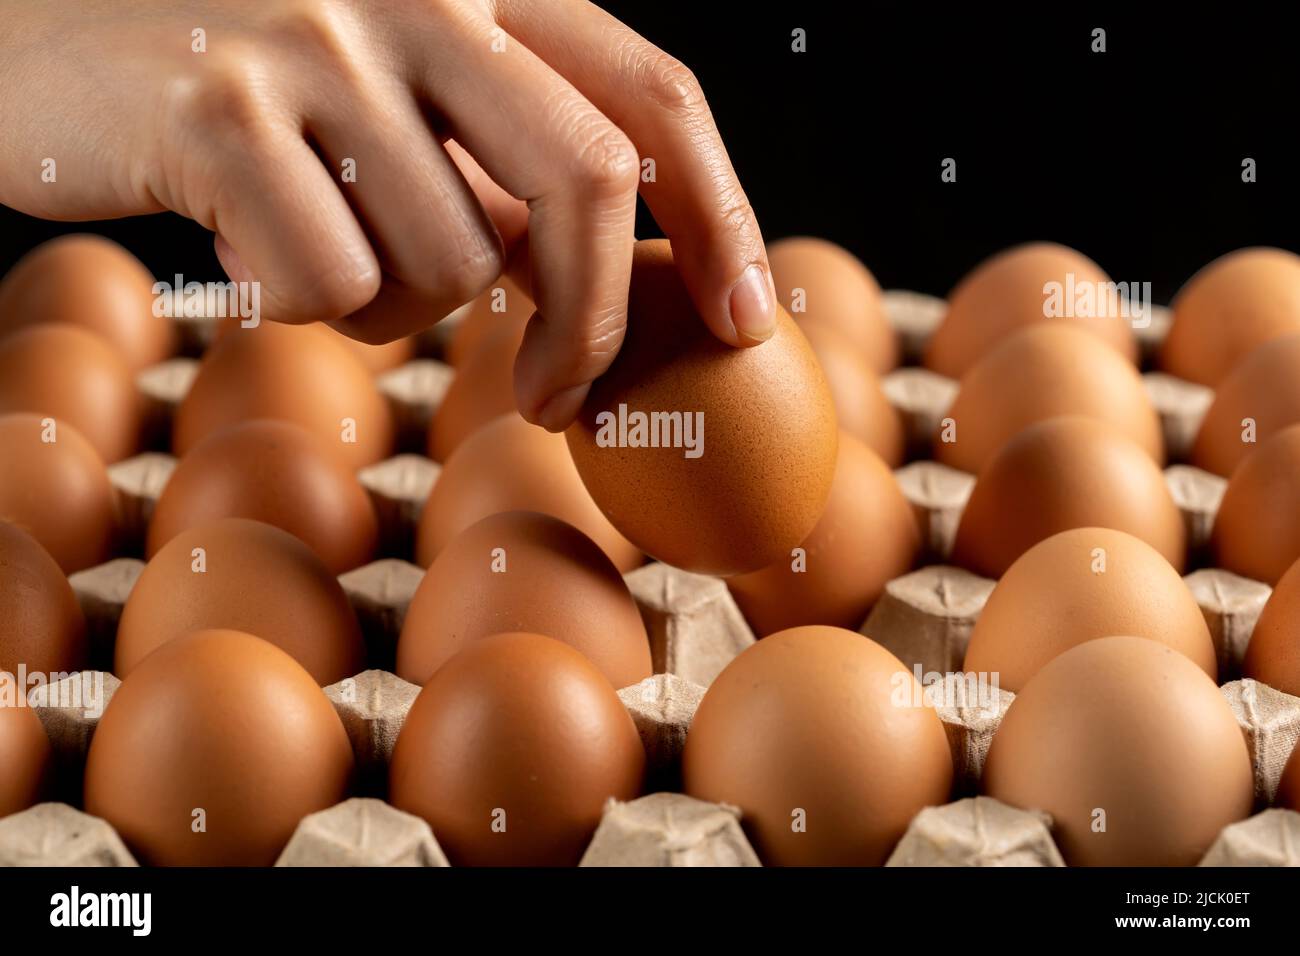 hand takes one chicken egg out of cardboard Stock Photo